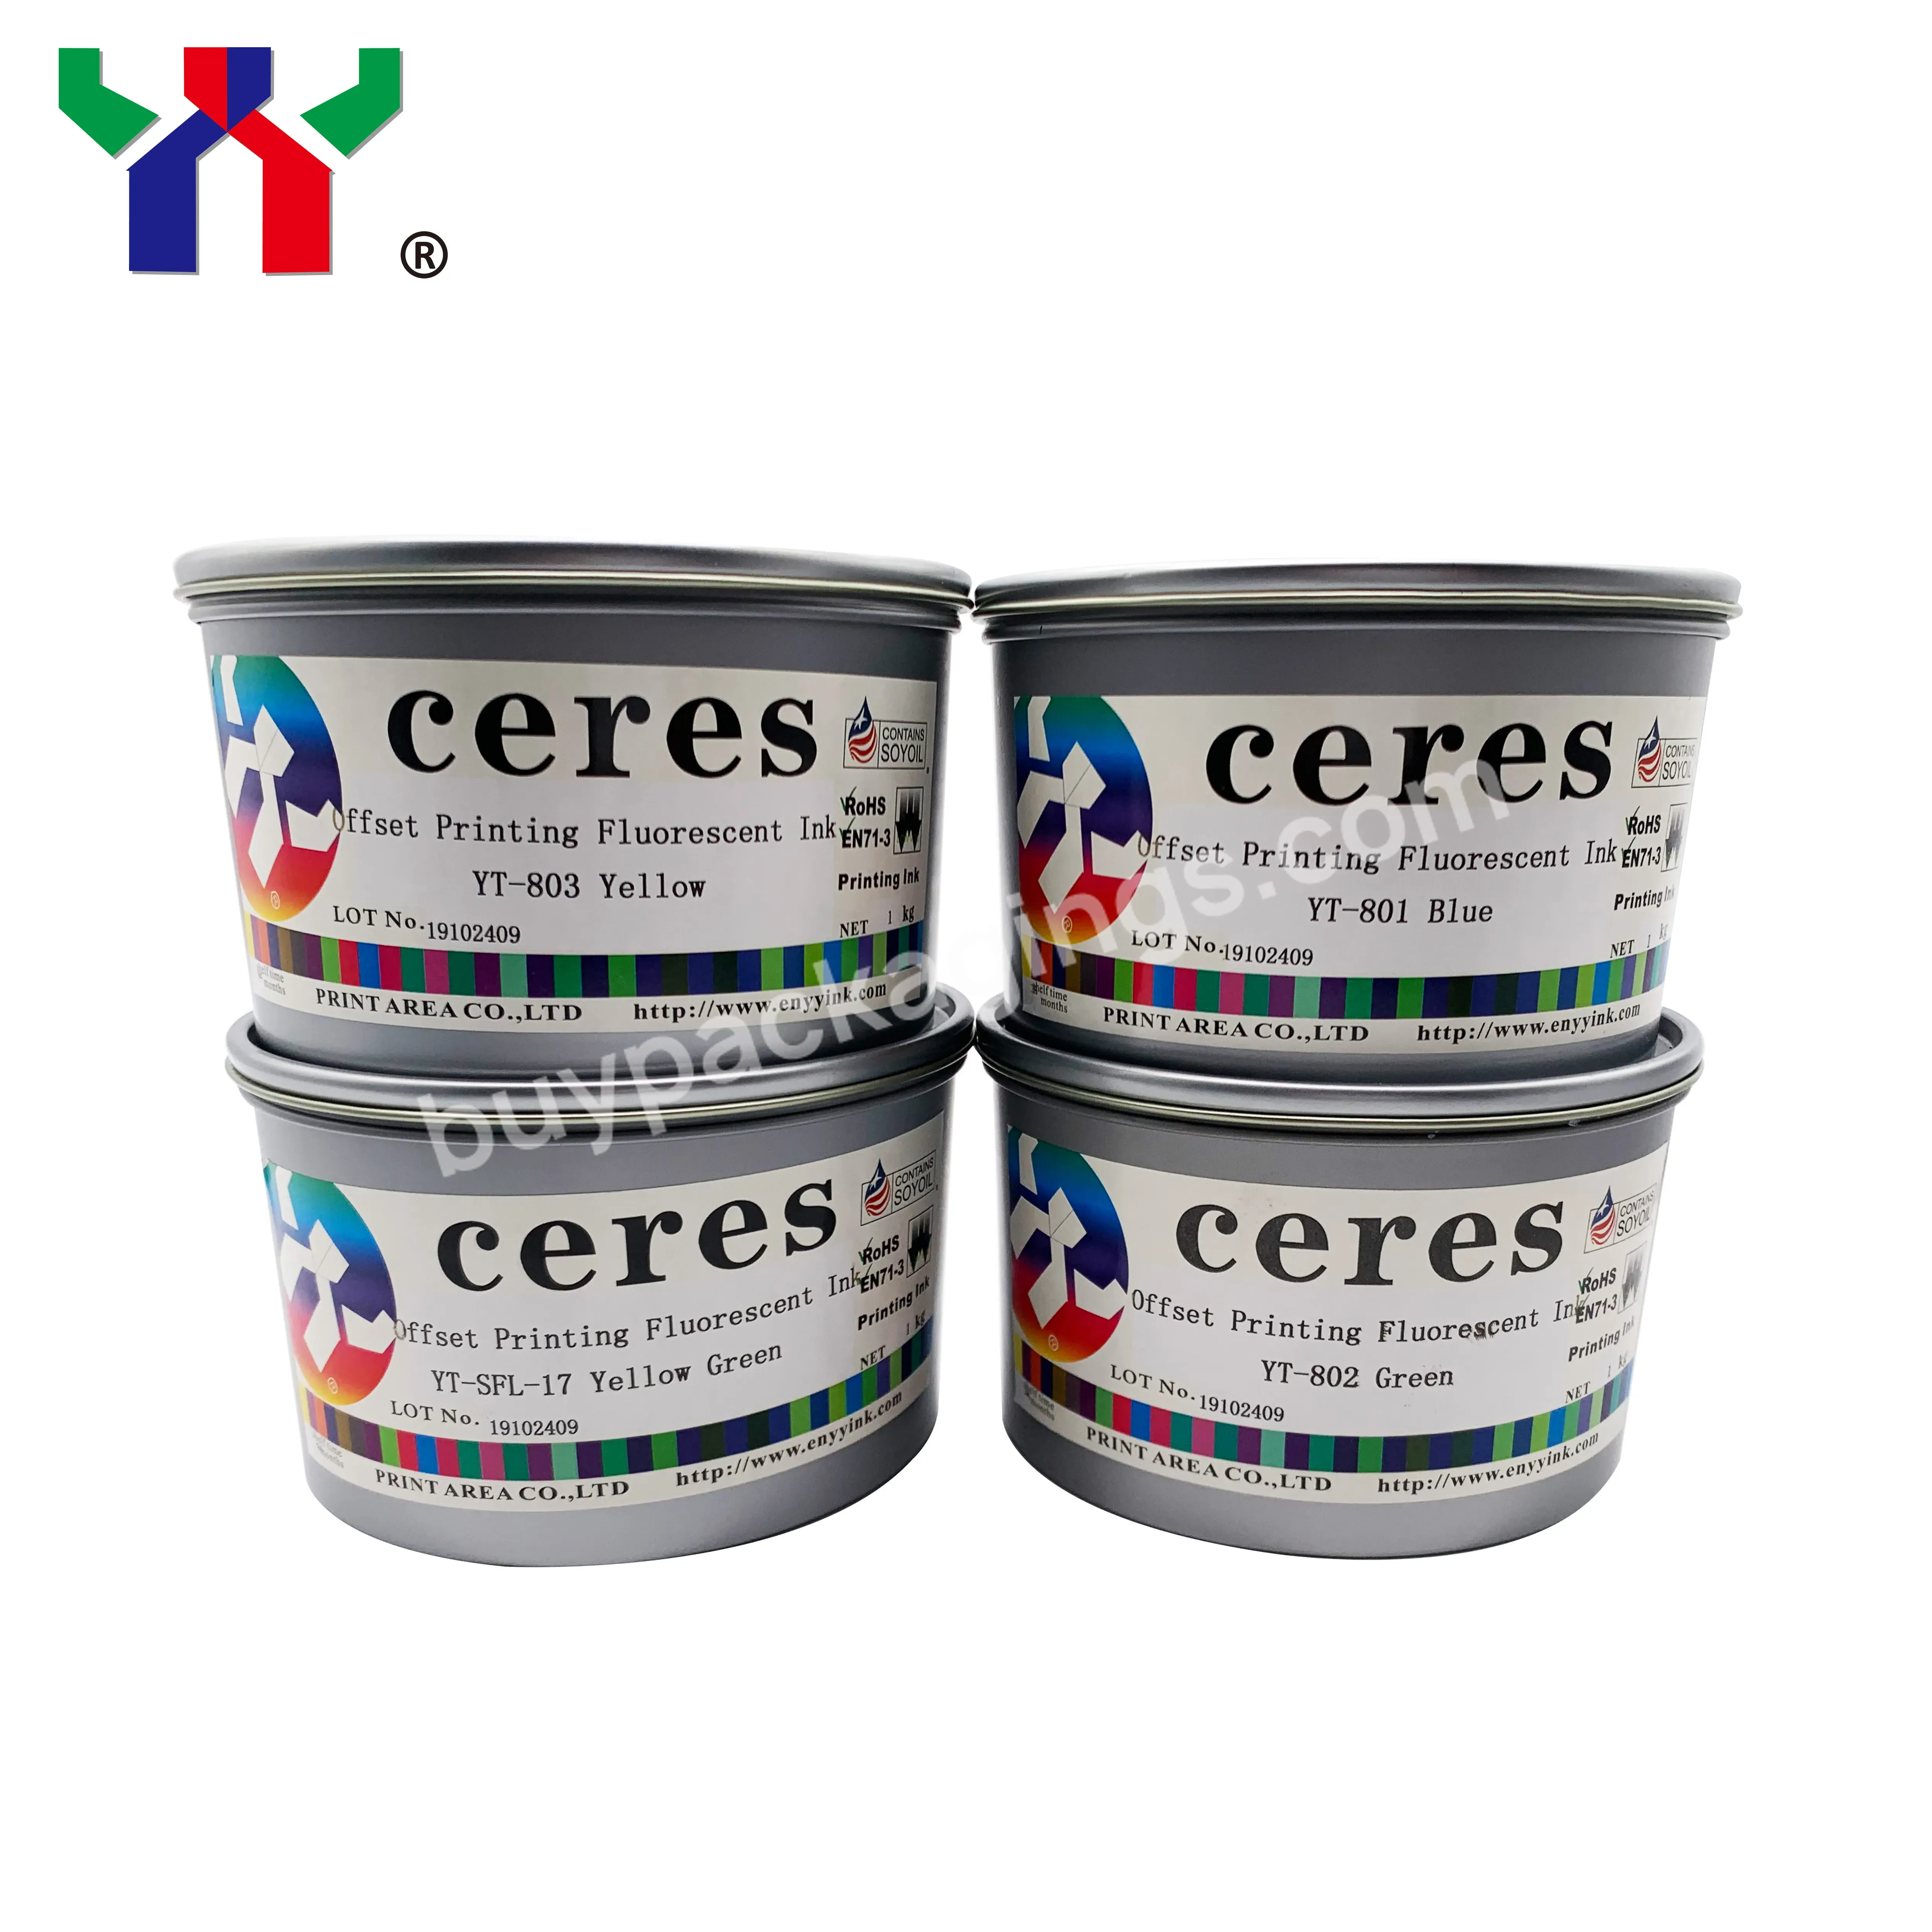 Ceres Offset Printing Fluorescent Ink,Air Dry Yt Sfi-17 Yellow Green,1 Kg/can